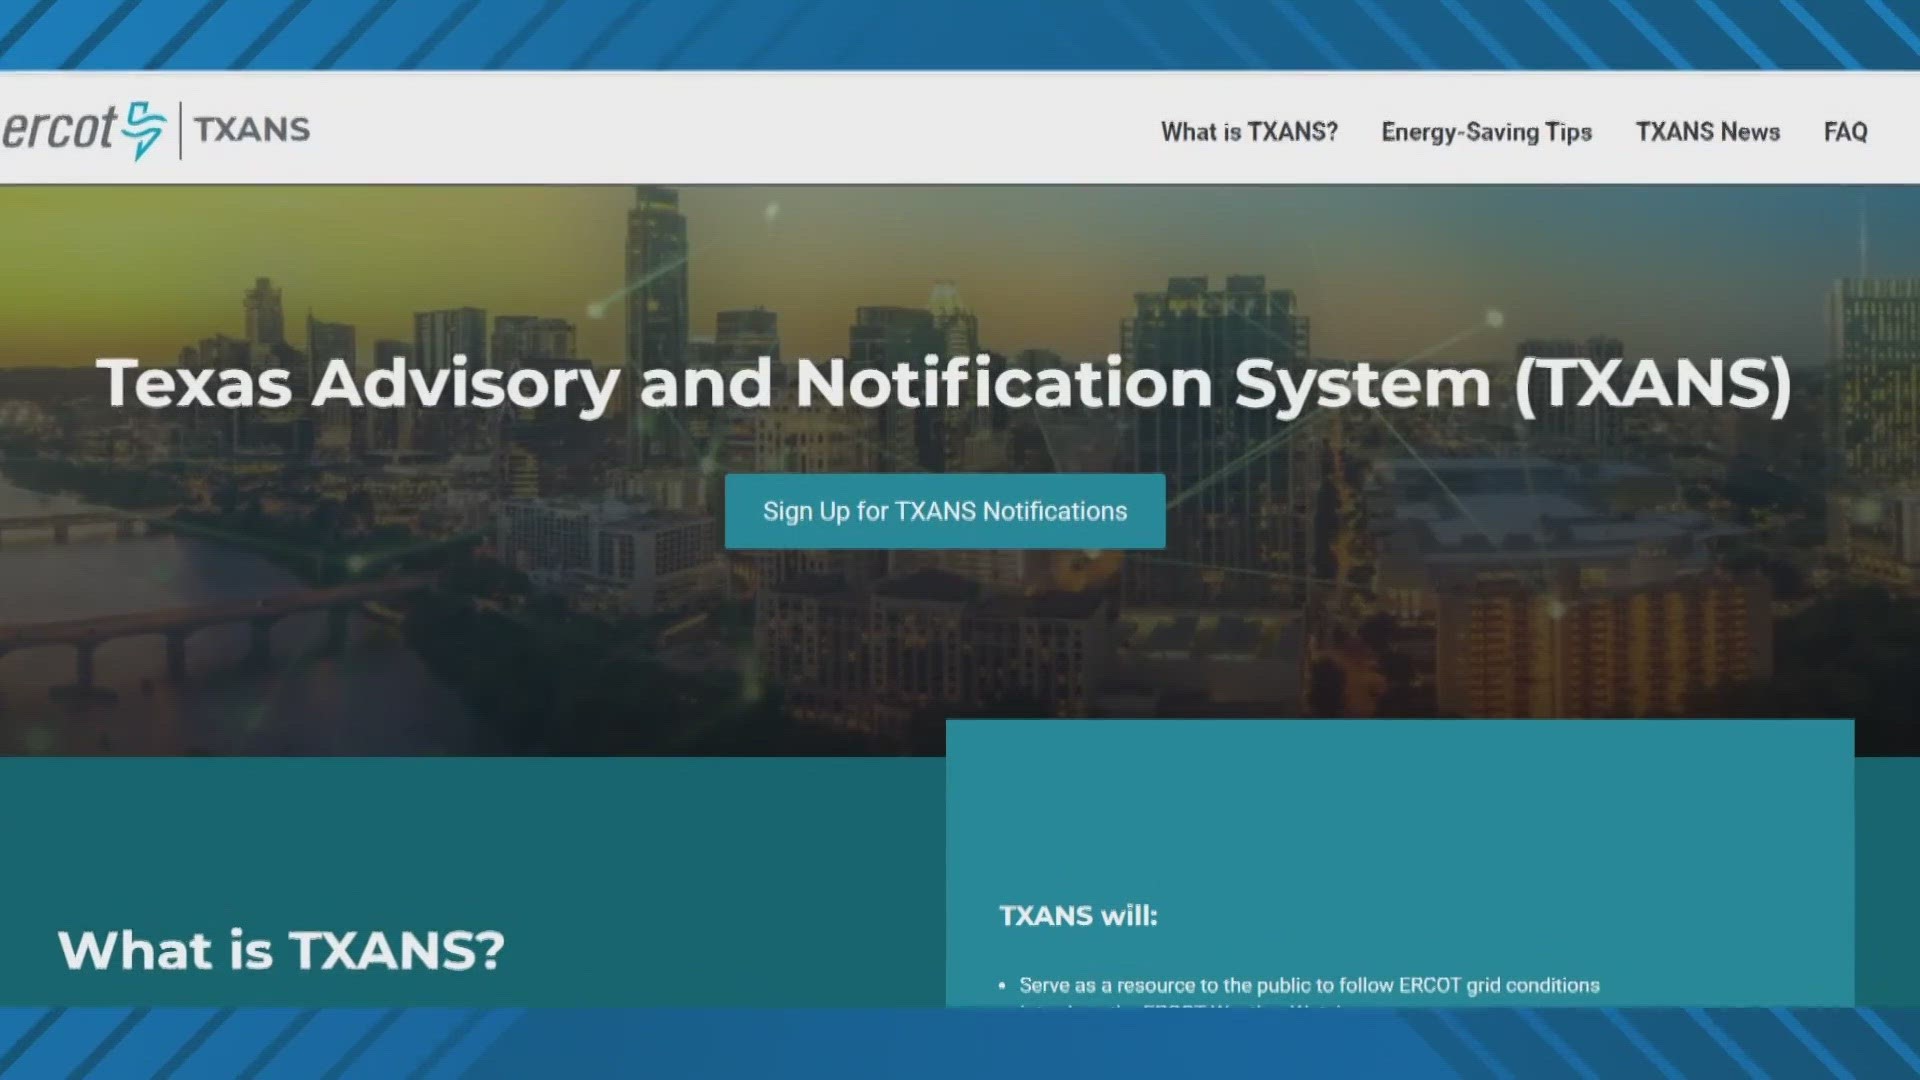 On Wednesday, the state's power operator launched a new messaging system called TXAN to keep Texans up-to-date on the power grid.